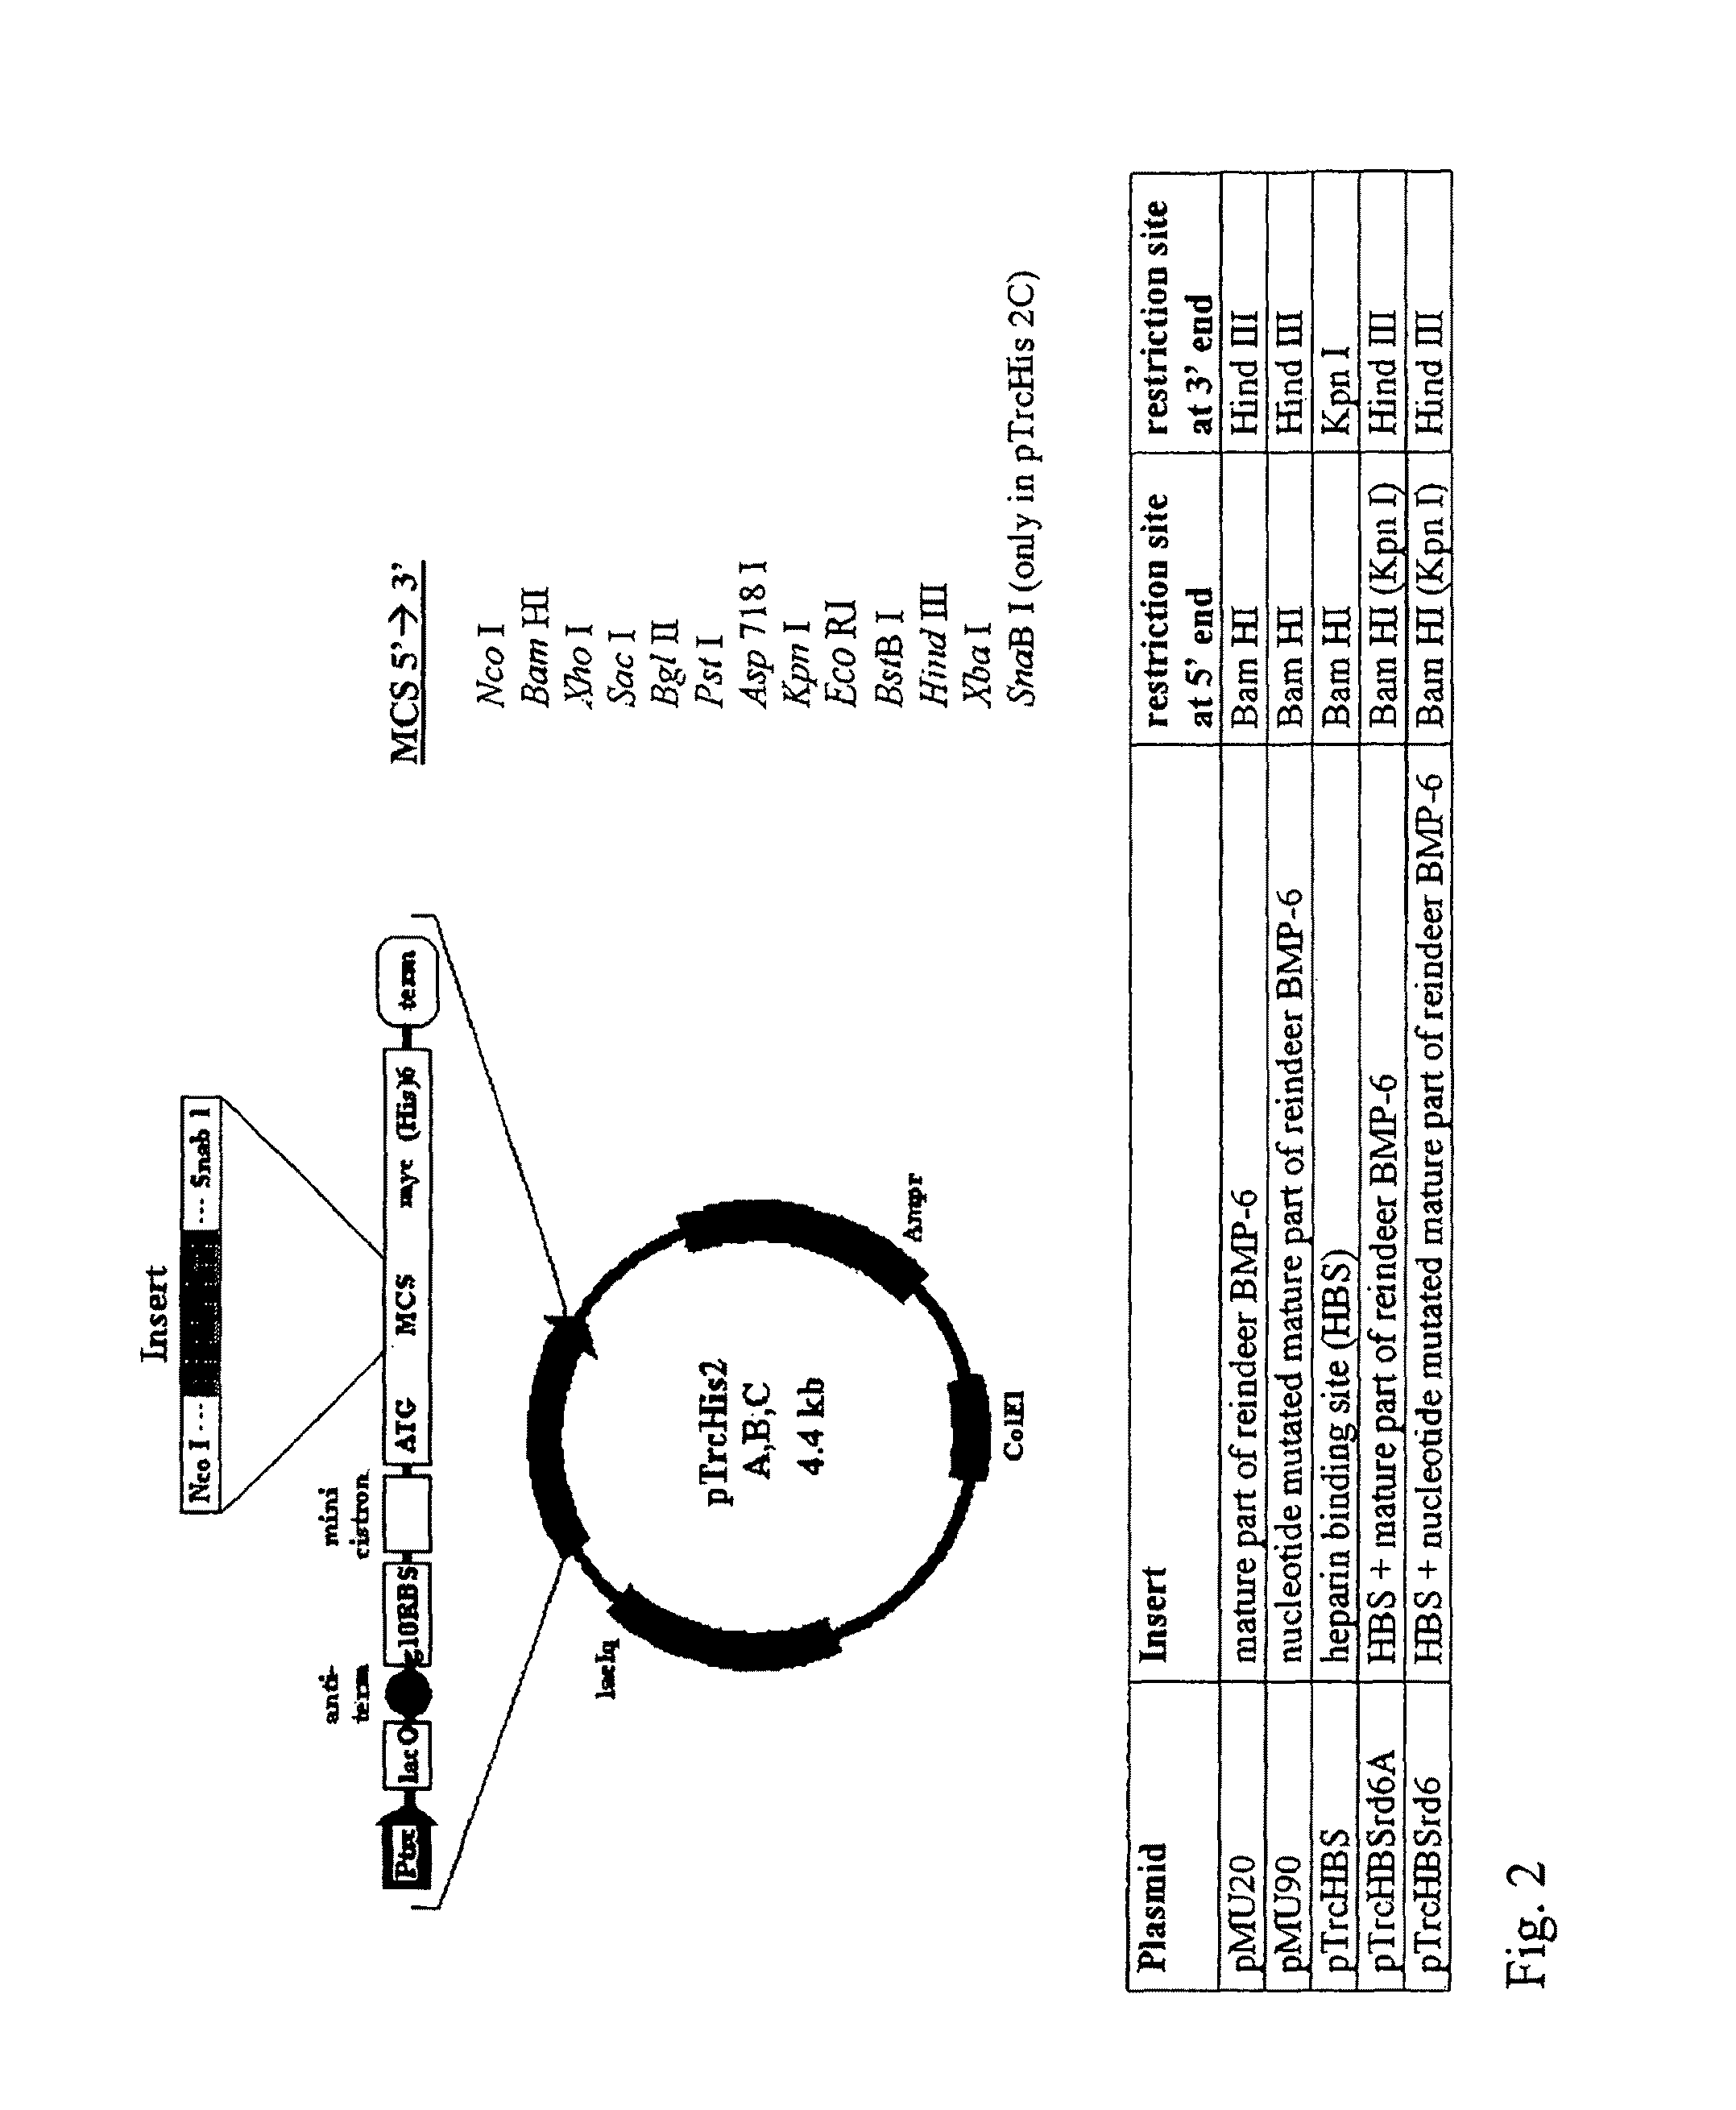 Bone morphogenetic proteins containing a heparin binding site and osteogenic devices and pharmaceutical products containing thereof